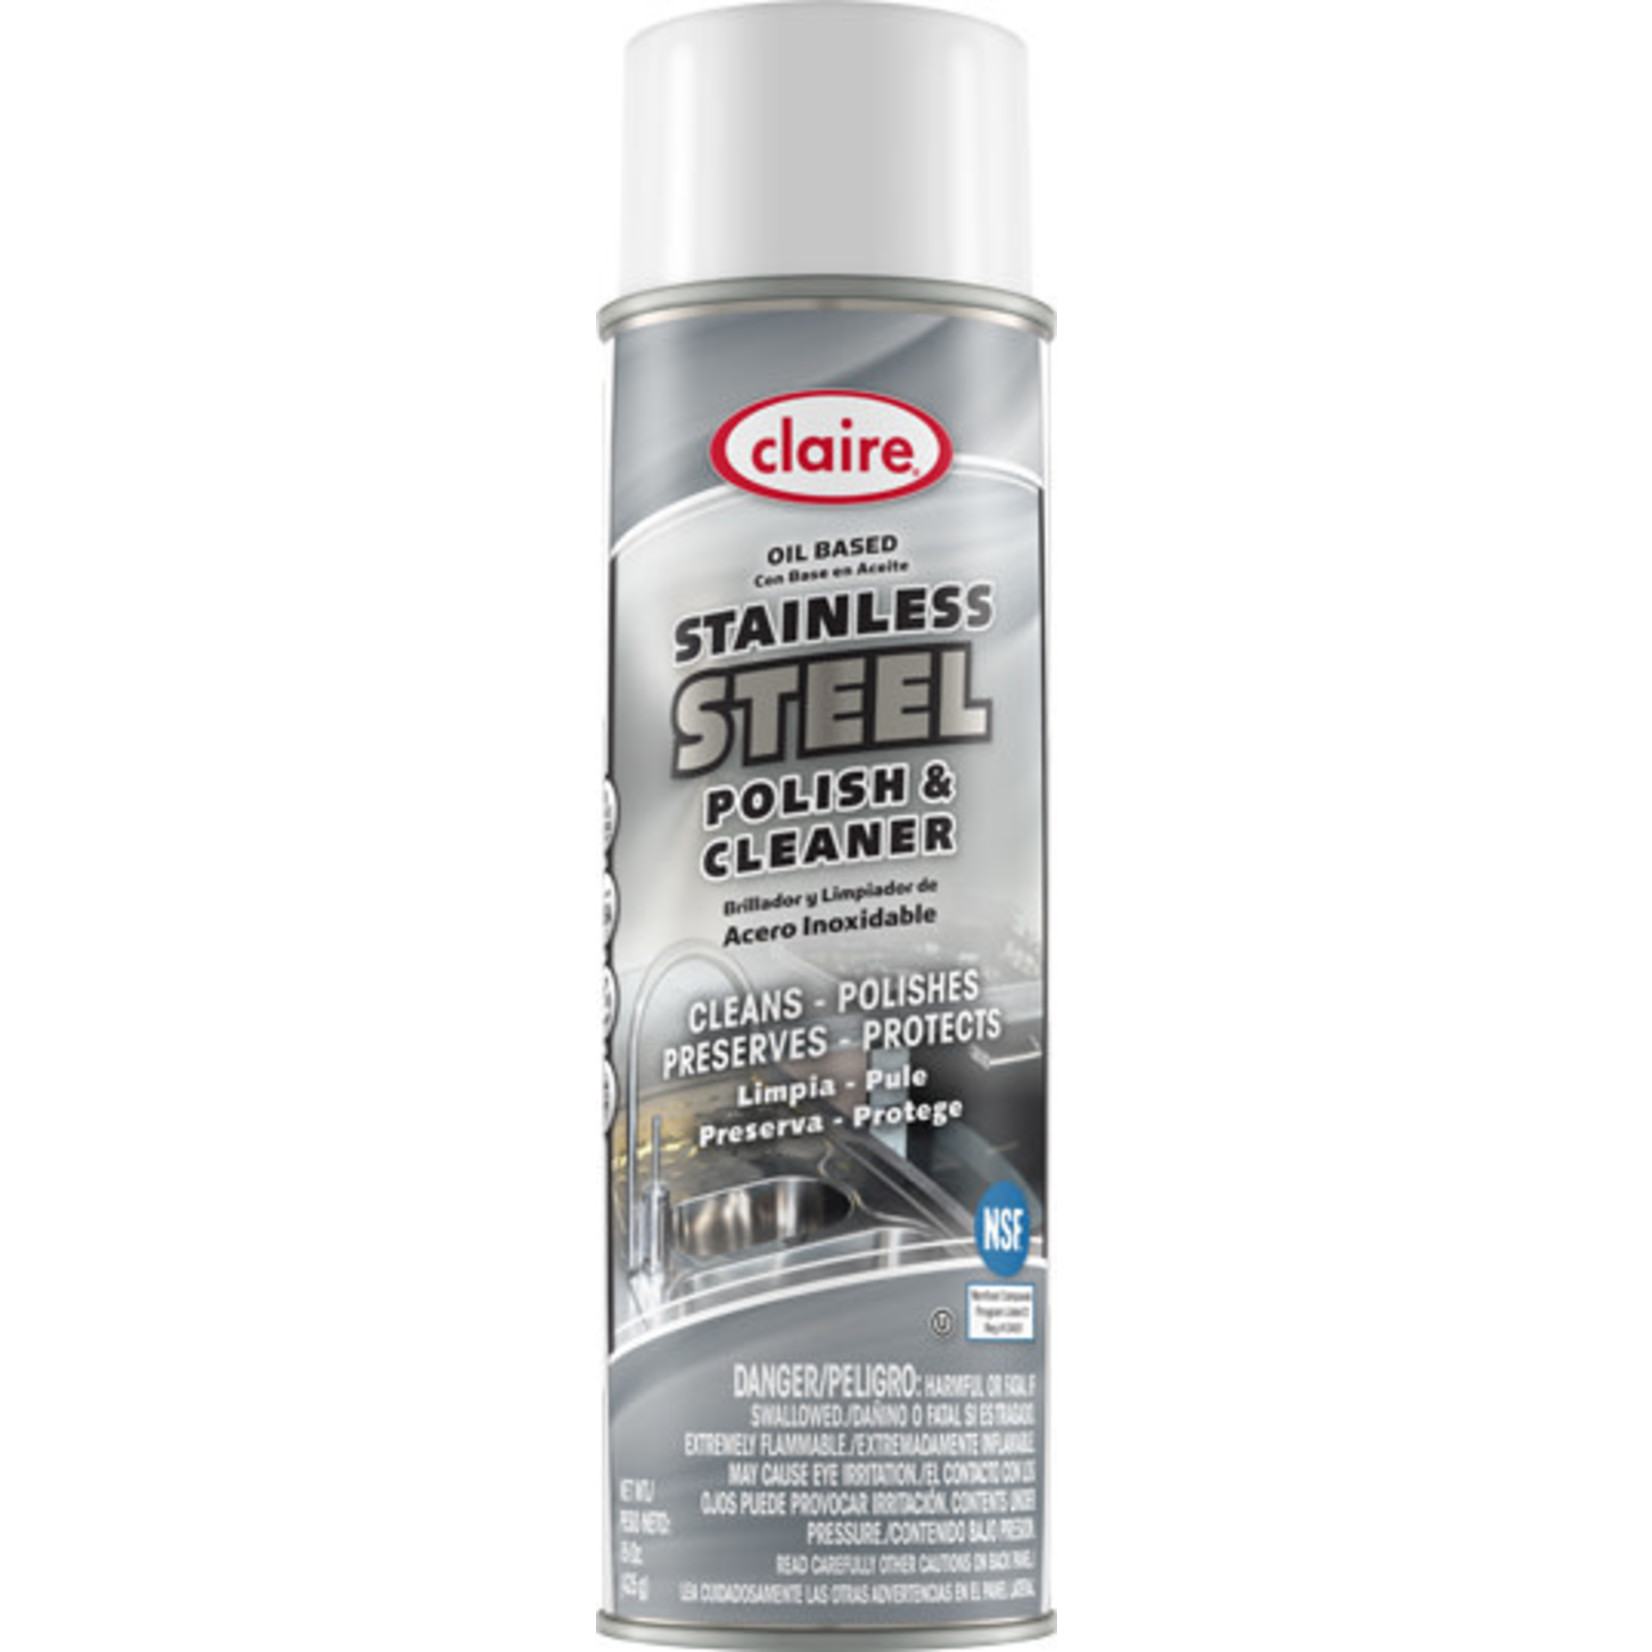 Claire Stainless Steel Oil Based Polish & Cleaner - 20oz